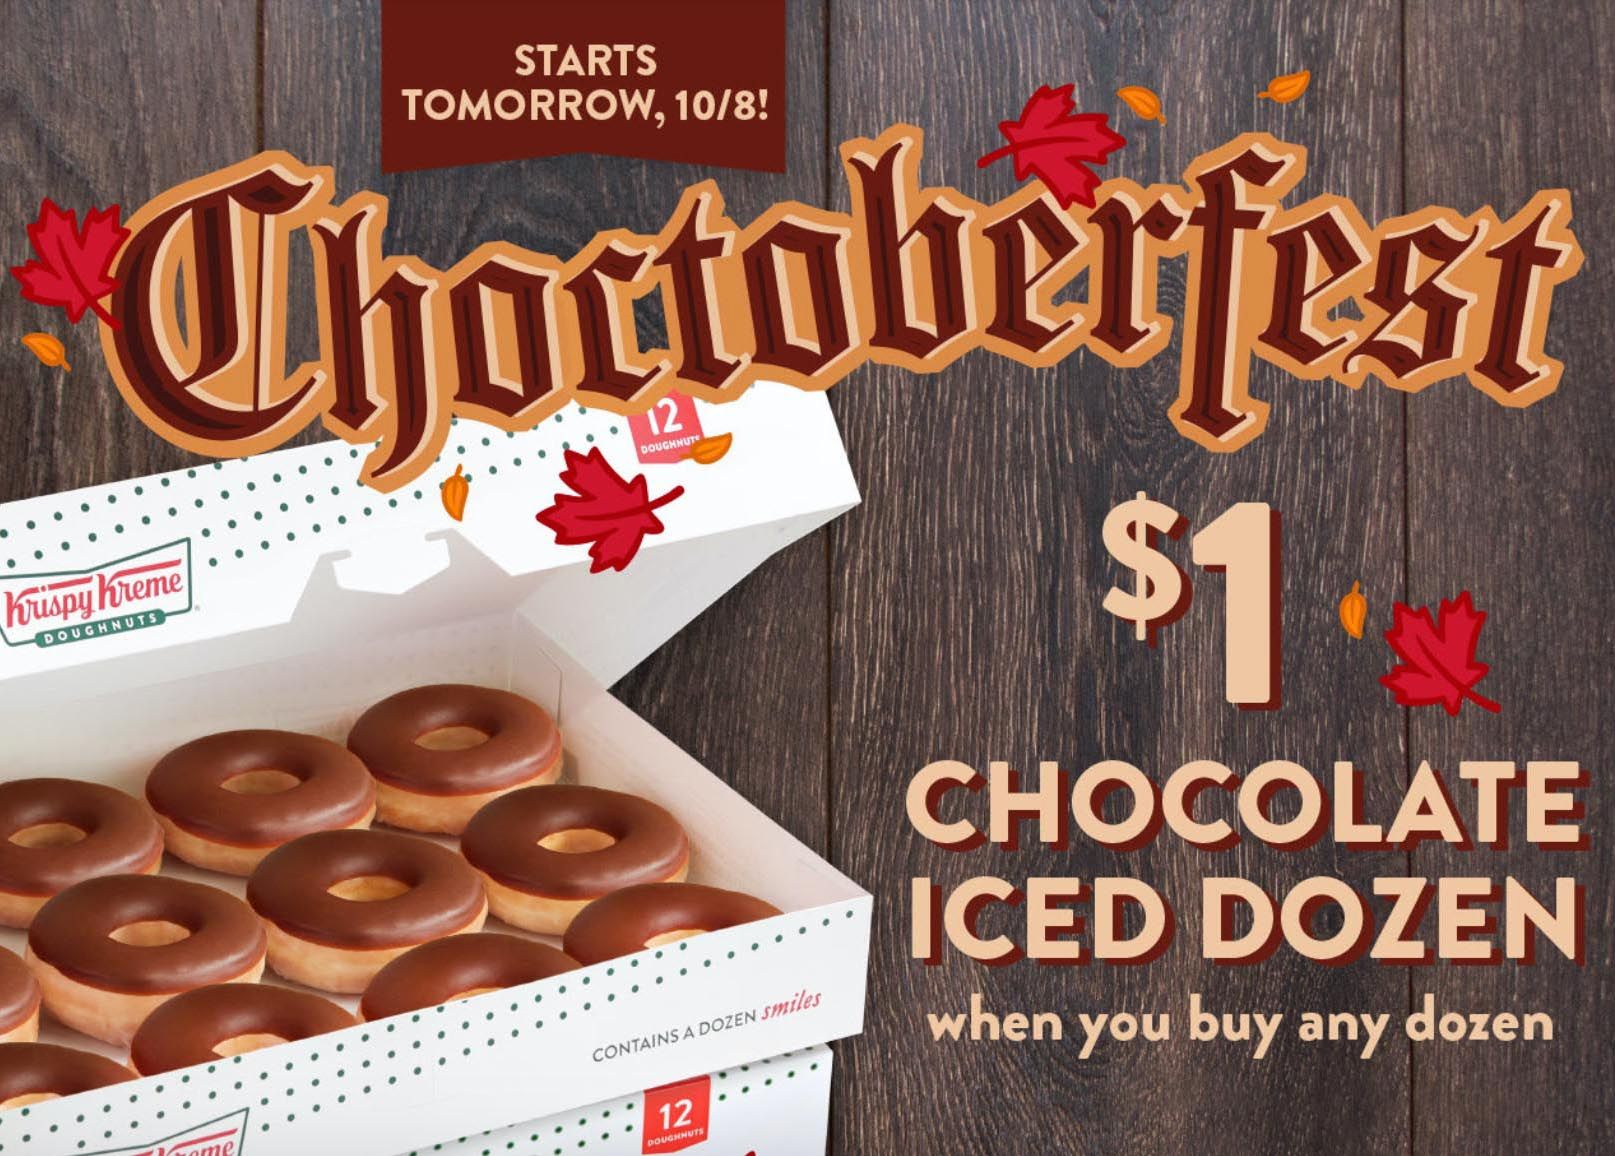 Buy 1 Dozen and Get a Second Chocolate Iced Dozen for $1 with a New Deal for Rewards Members at Krispy Kreme